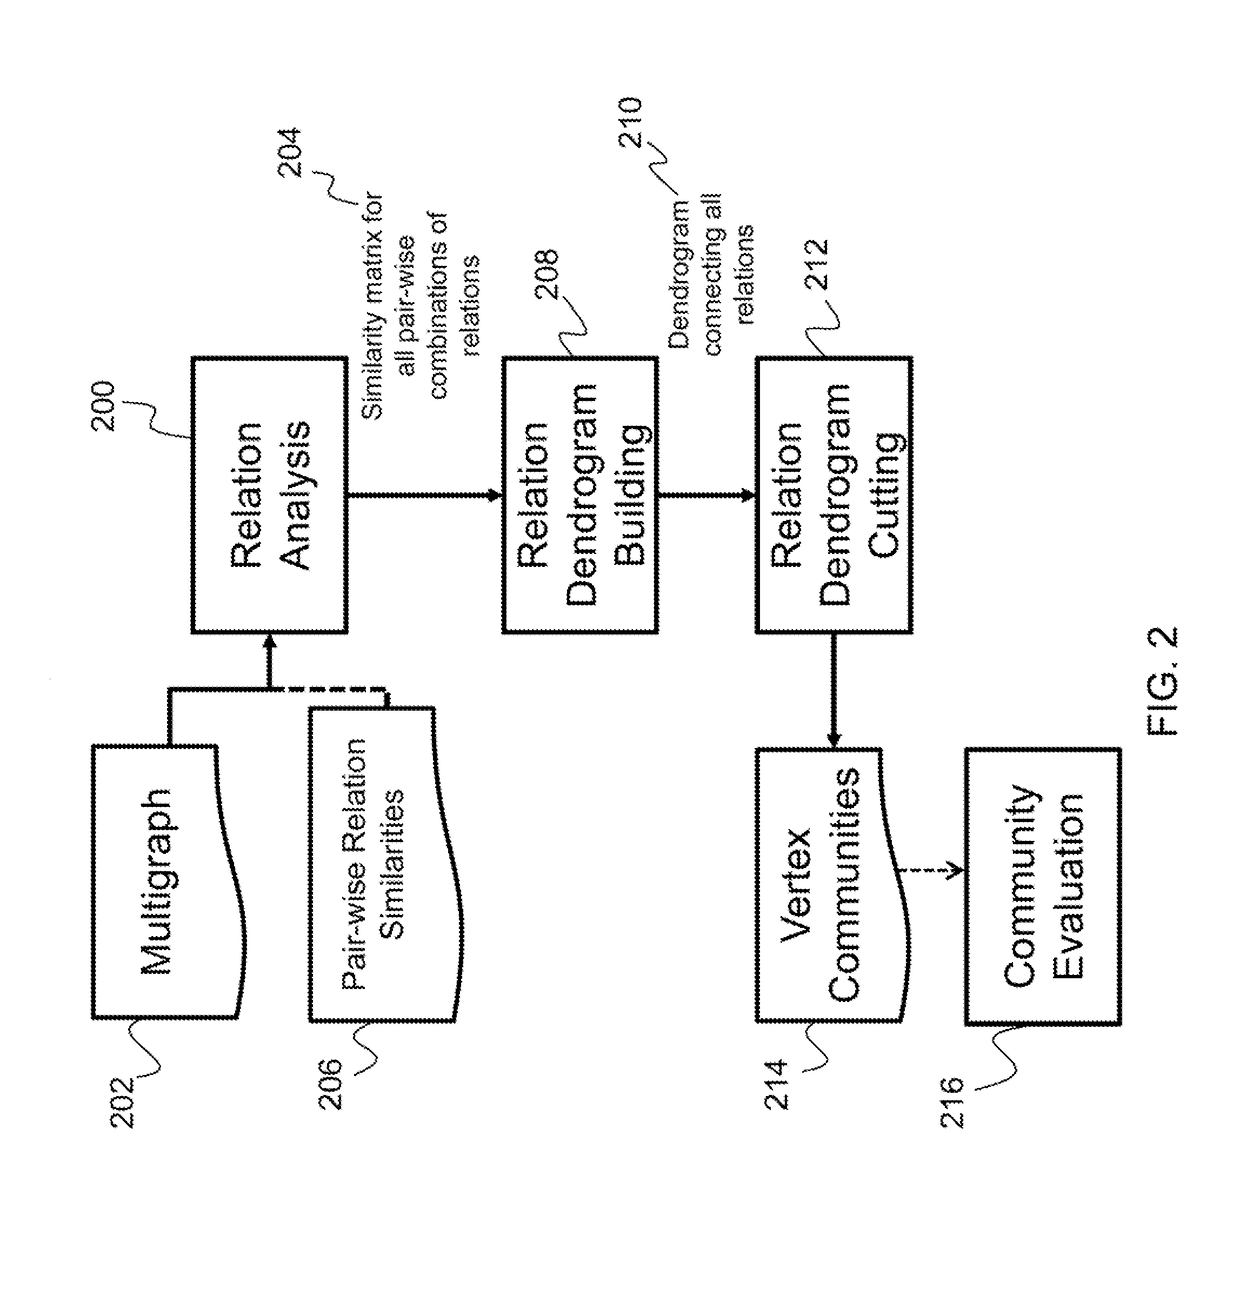 System and methods for automated community discovery in networks with multiple relational types